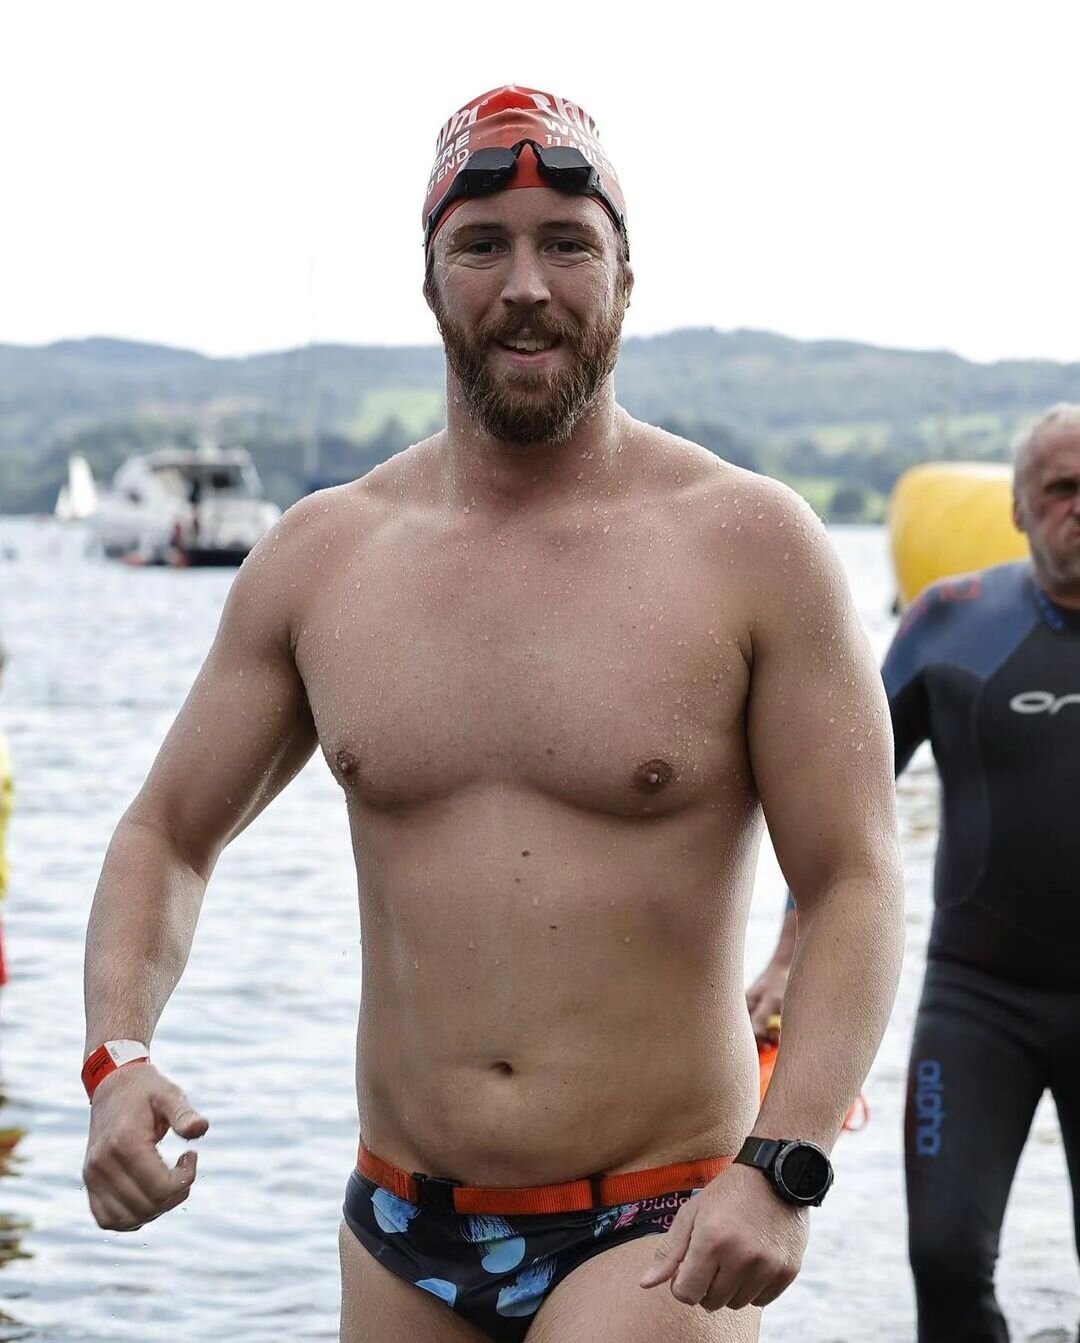 Congratulations to our Brighton coach on his 11-mile swim 👴🏻🏊&zwj;♂️ #chillswimwindermere #aginggracefully @chillswim_uk @aquasphere
Reposted from @andyswimstagram